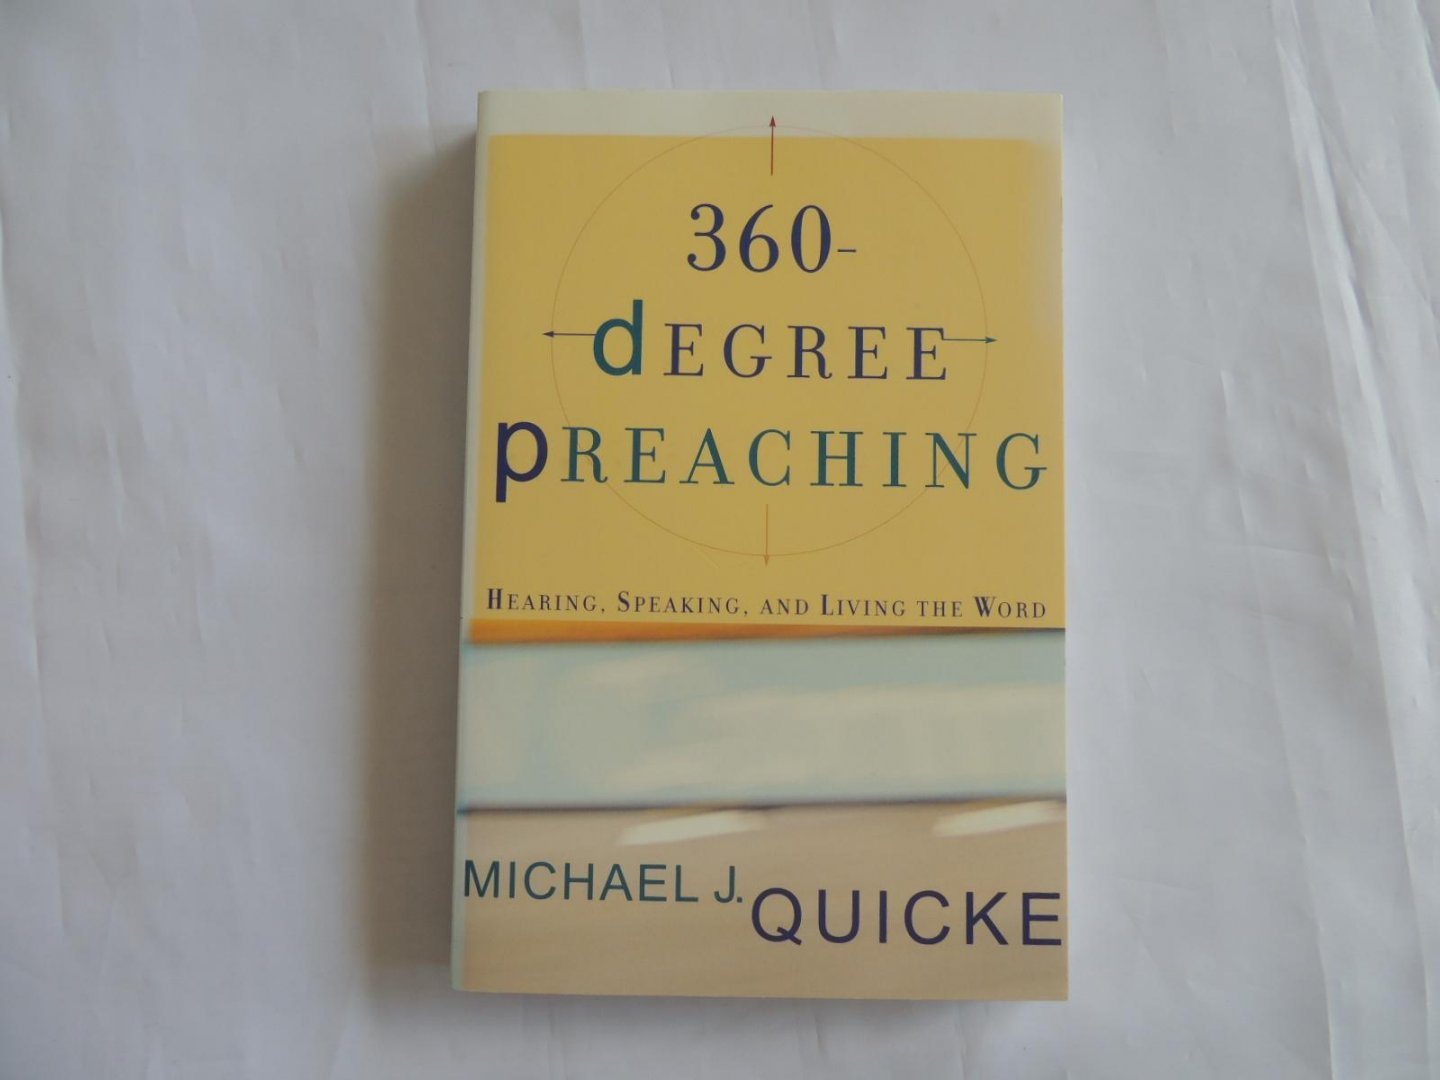 Quicke, Michael J. - 360 Degree Preaching - Hearing, Speaking, and Living the Word